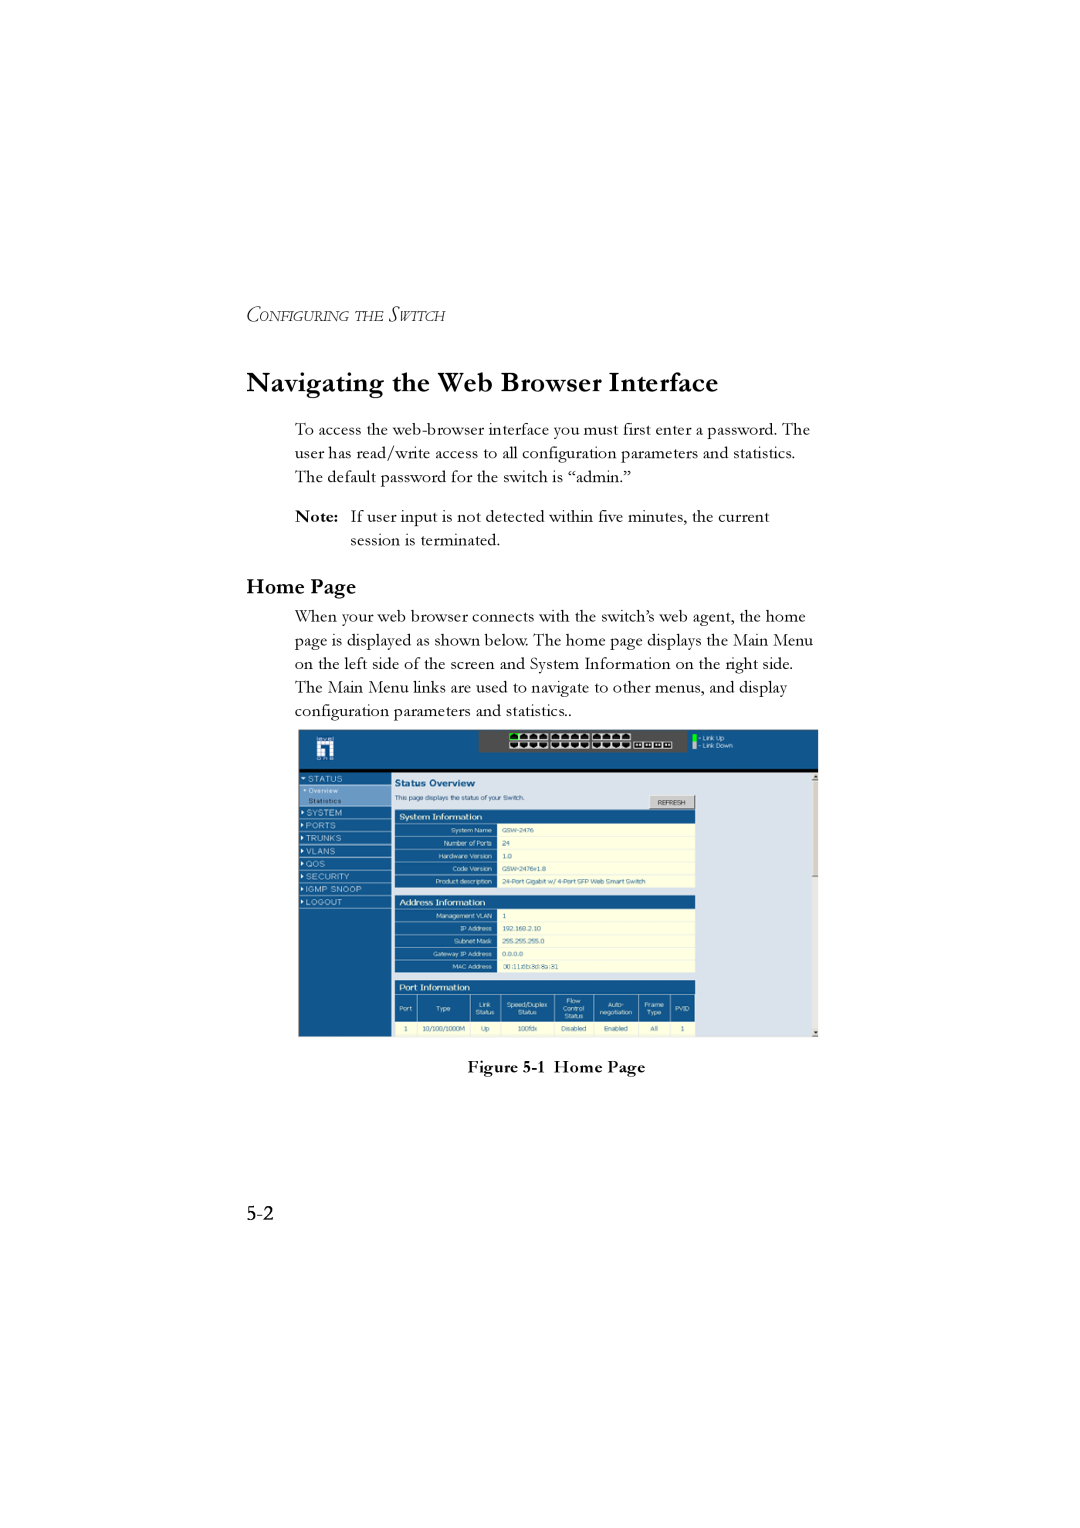 LevelOne GSW-2476 user manual Navigating the Web Browser Interface, 1 Home Page 